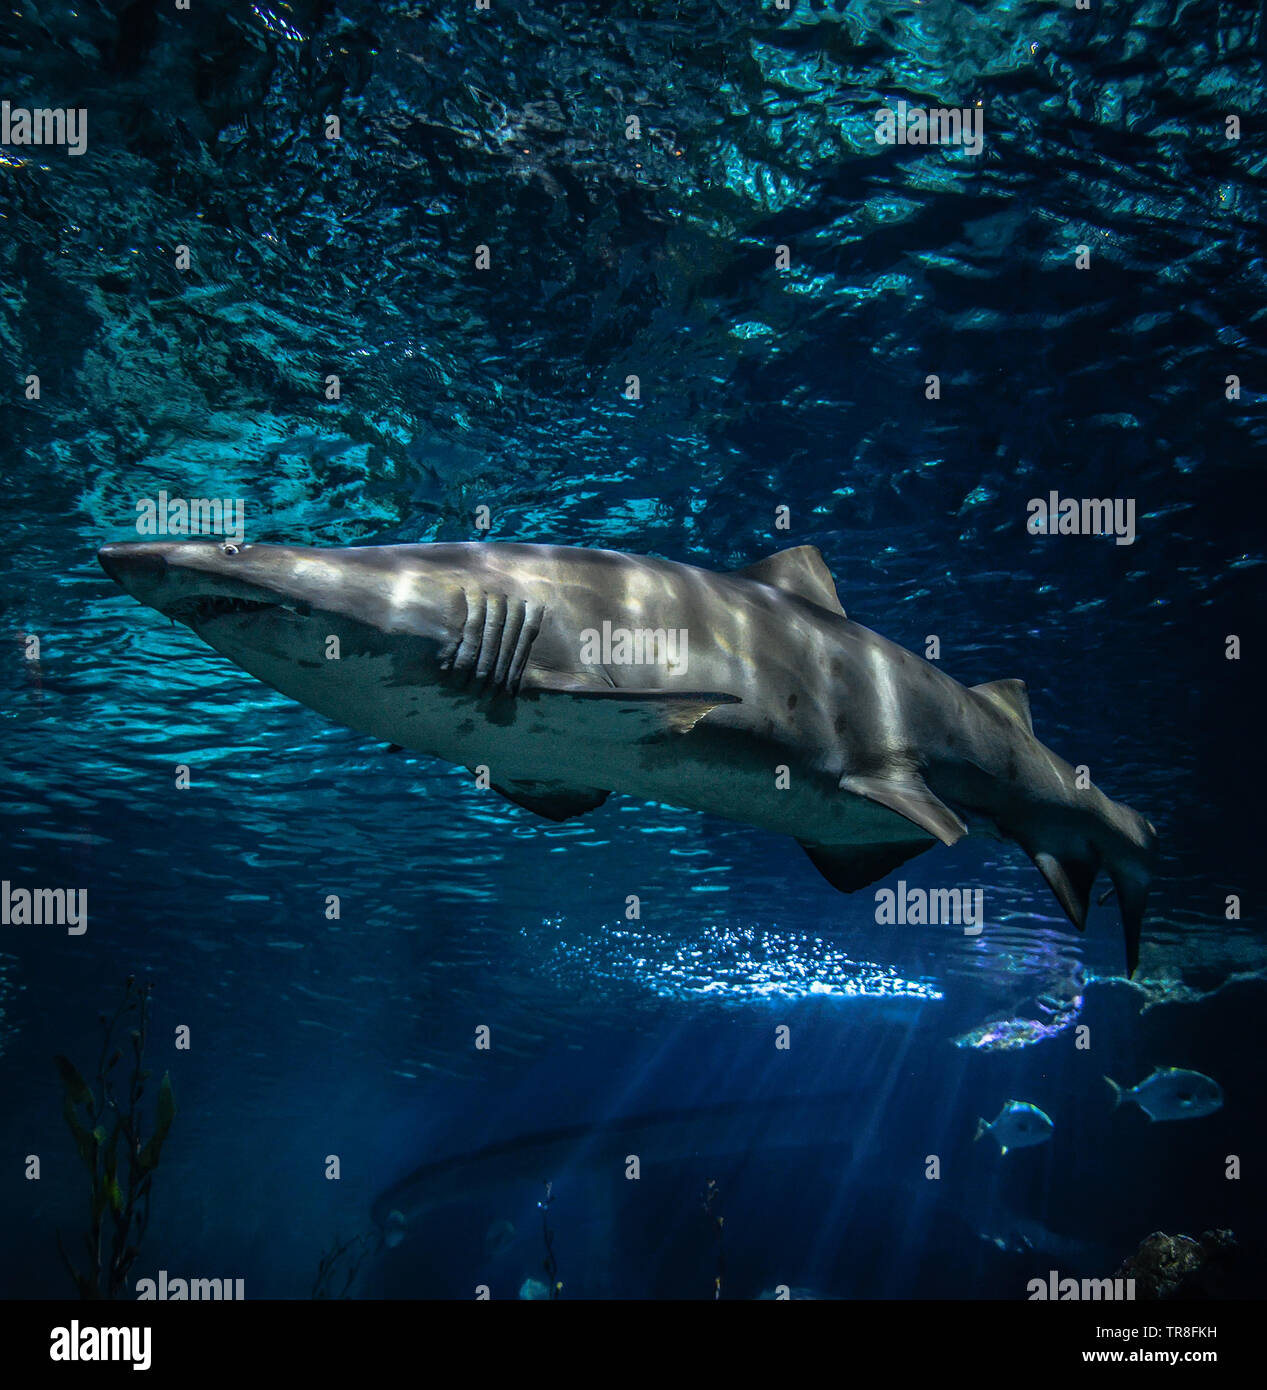 Sand tiger shark swimming marine life in the ocean / ragged tooth shark picture sea underwater Stock Photo